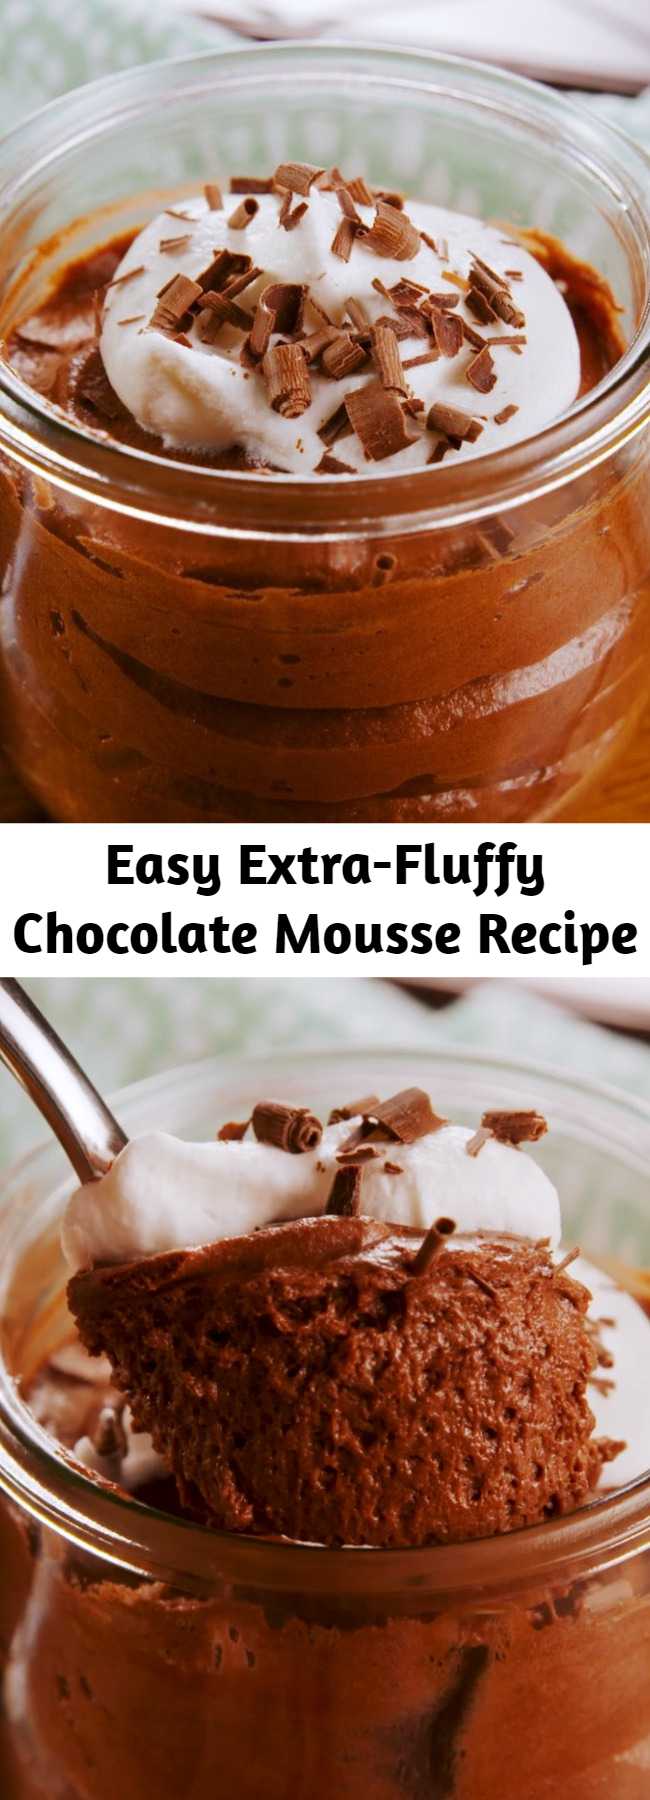 Easy Extra-Fluffy Chocolate Mousse Recipe - In our minds, chocolate mousse is pretty much a super fluffy pudding. The chocolate flavor needs to be really strong, and the texture needs to be pillowy and smooth. There are a few different routes you can go to achieve this, but to us, this is the easiest and best way. #easy #recipe #chocolate #mousse #fluffy #dessert #eggwhites #heavycream #butter #scratch #homemade #howto #best #filling